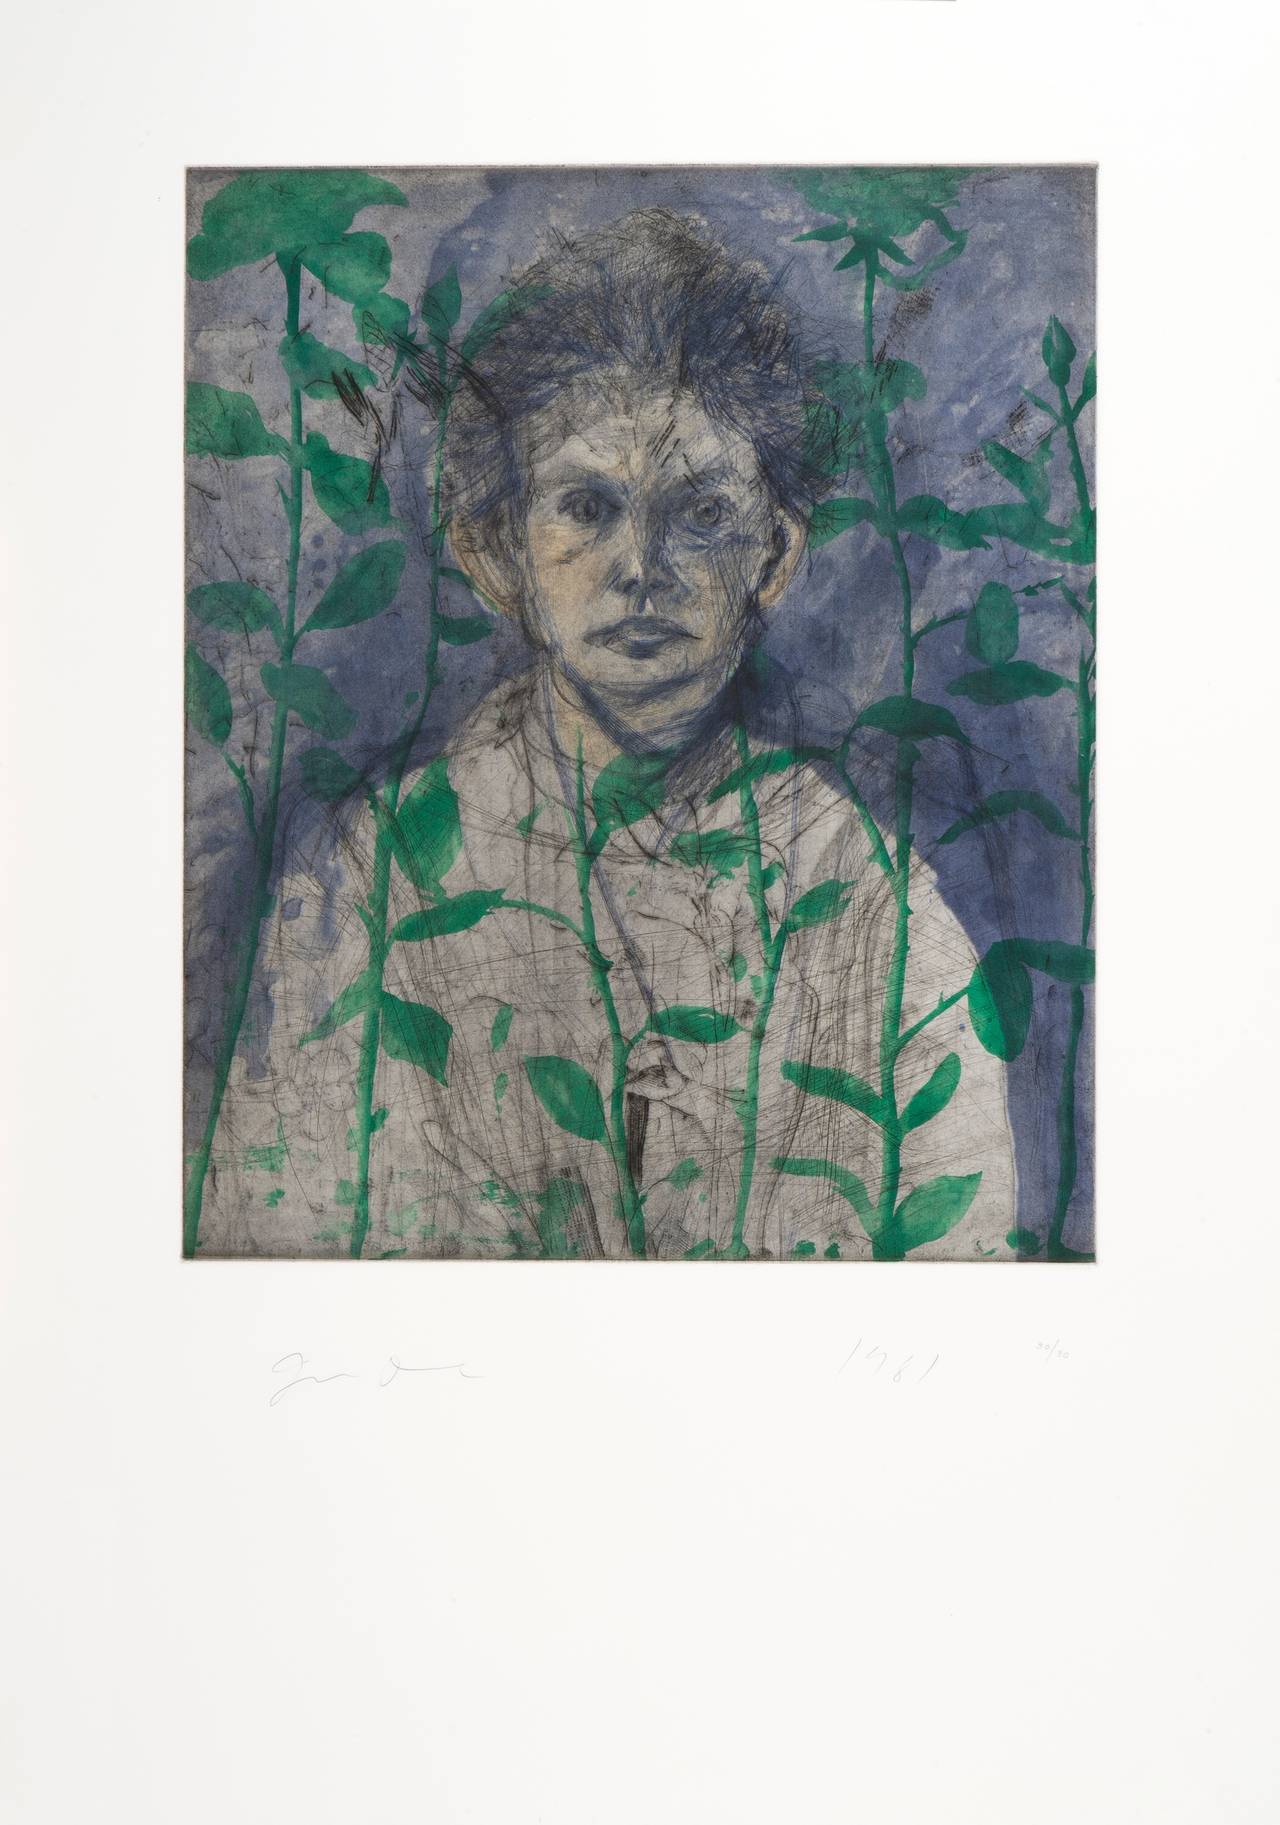 Nancy outside in July with green leaves - Print by Jim Dine